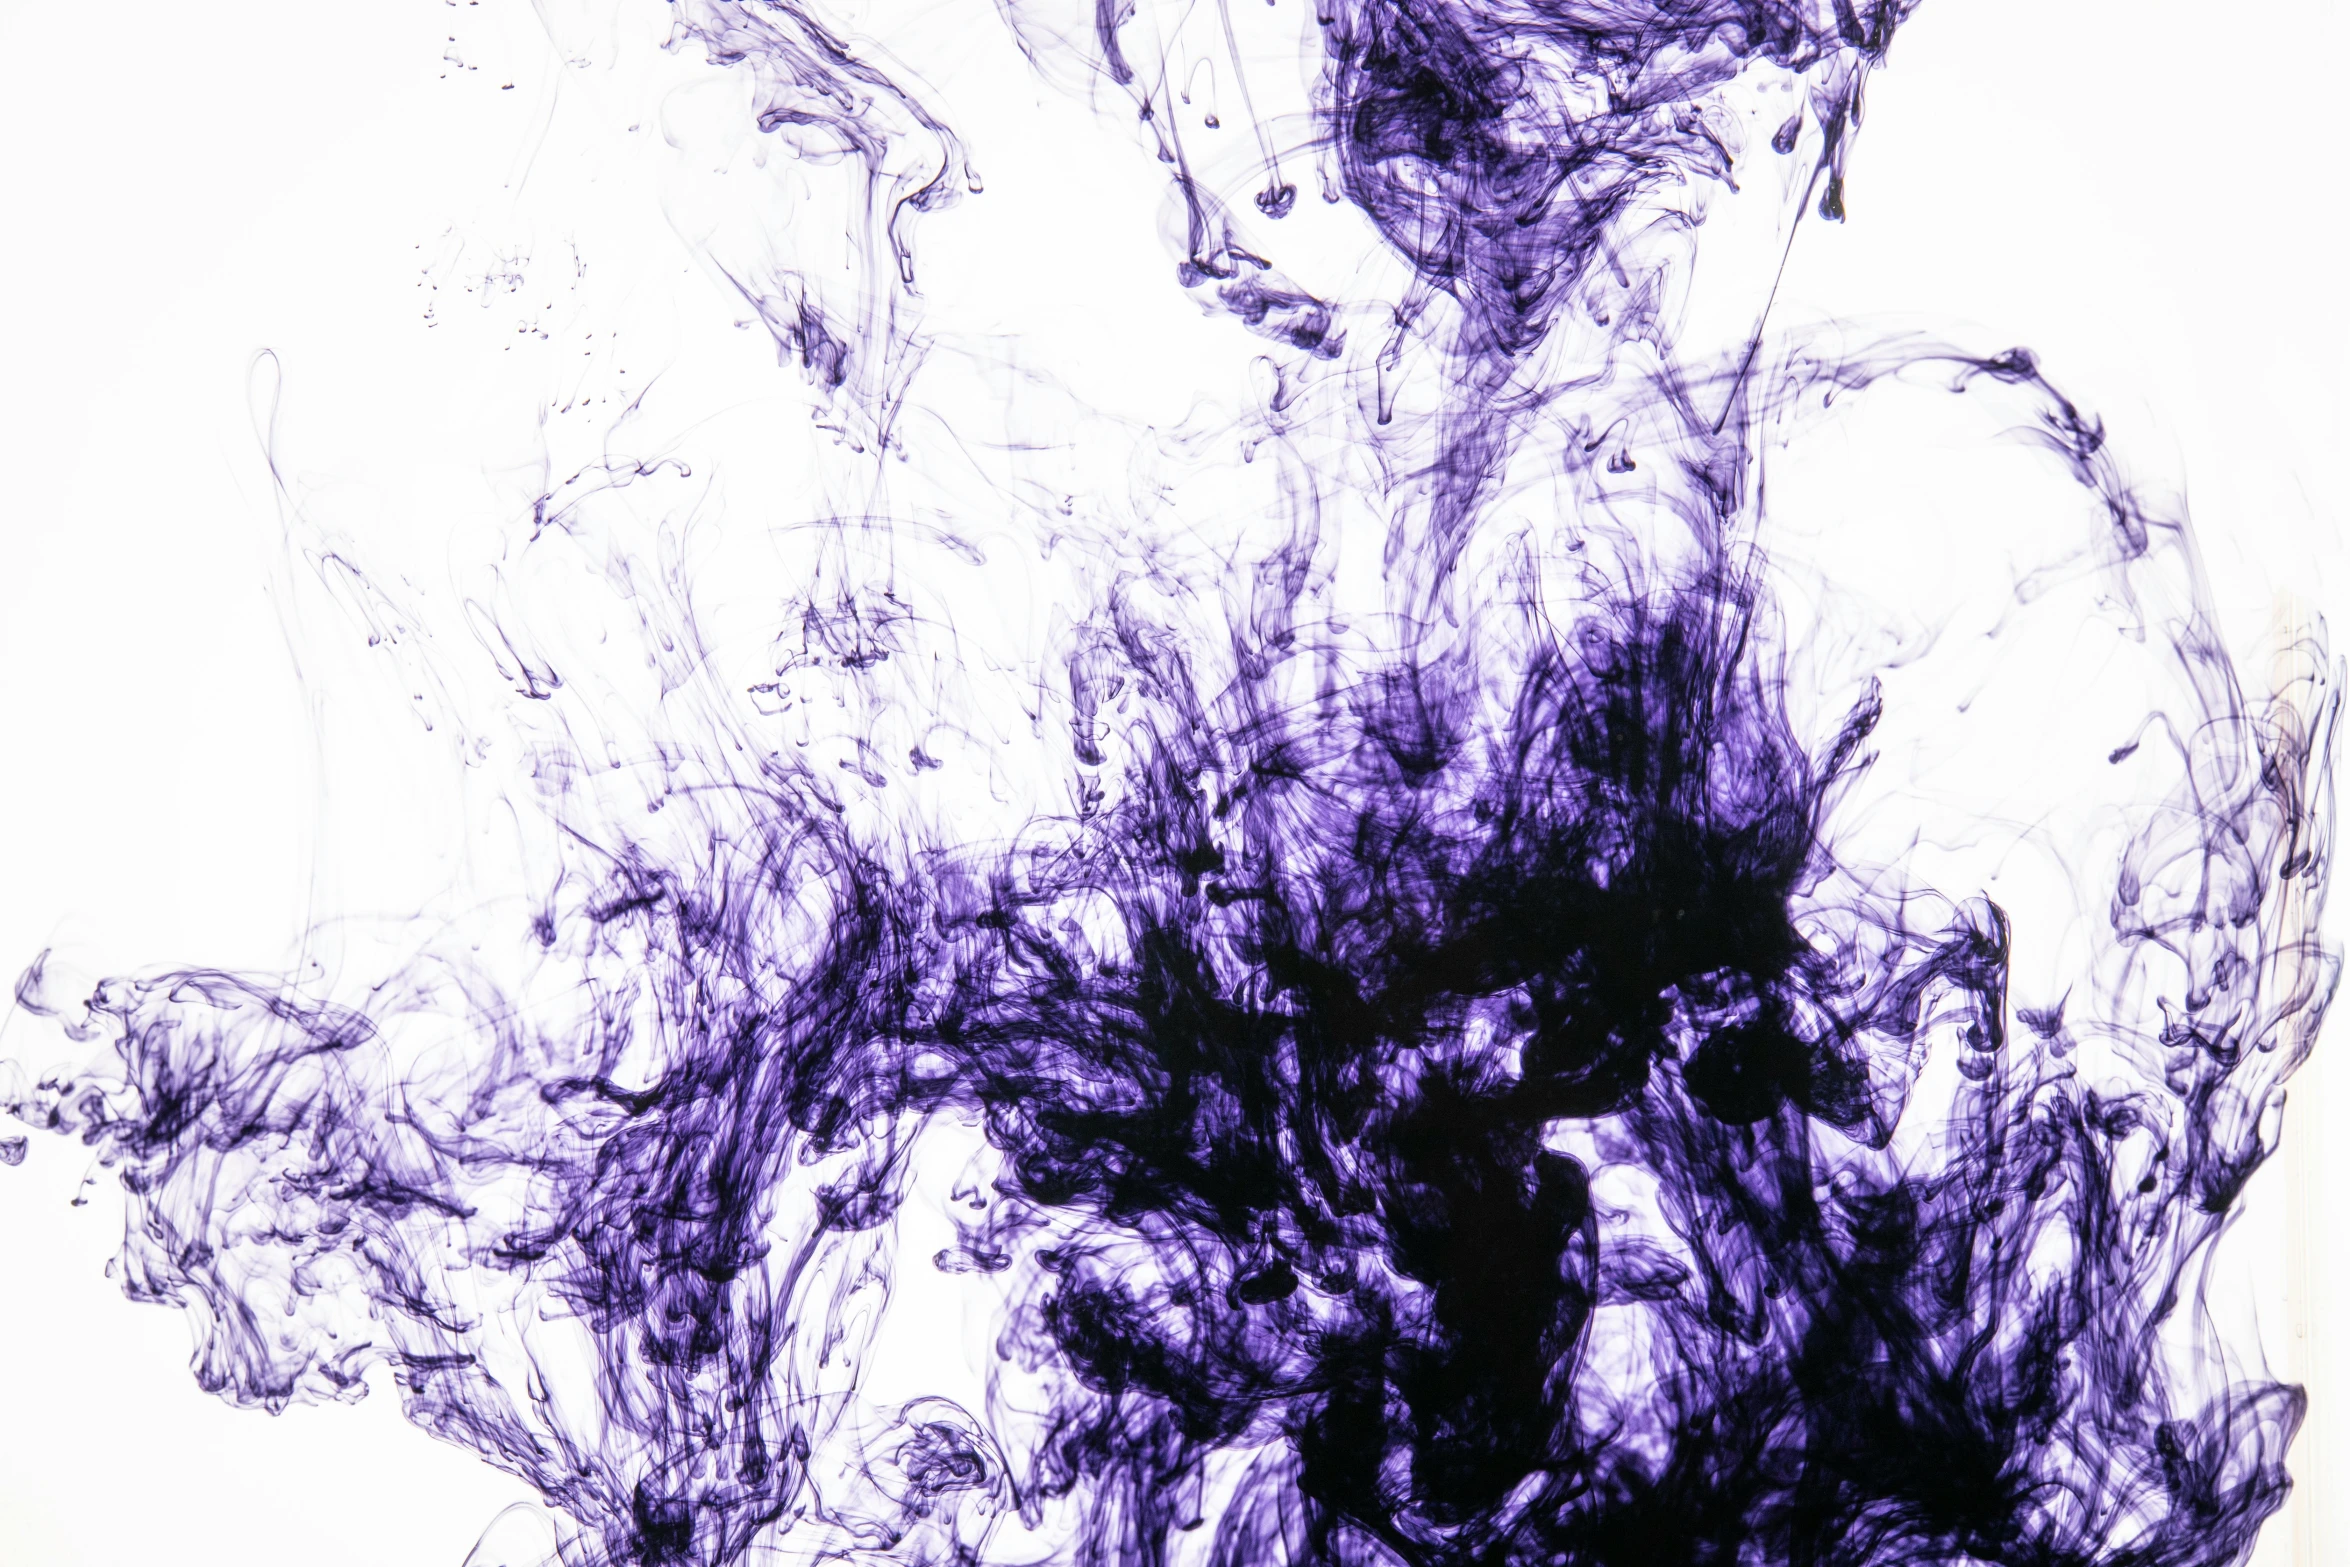 a black and white photo of smoke in the air, an abstract drawing, inspired by Yves Klein, pexels, generative art, second colours - purple, ink on paper, liquid glass, low detail